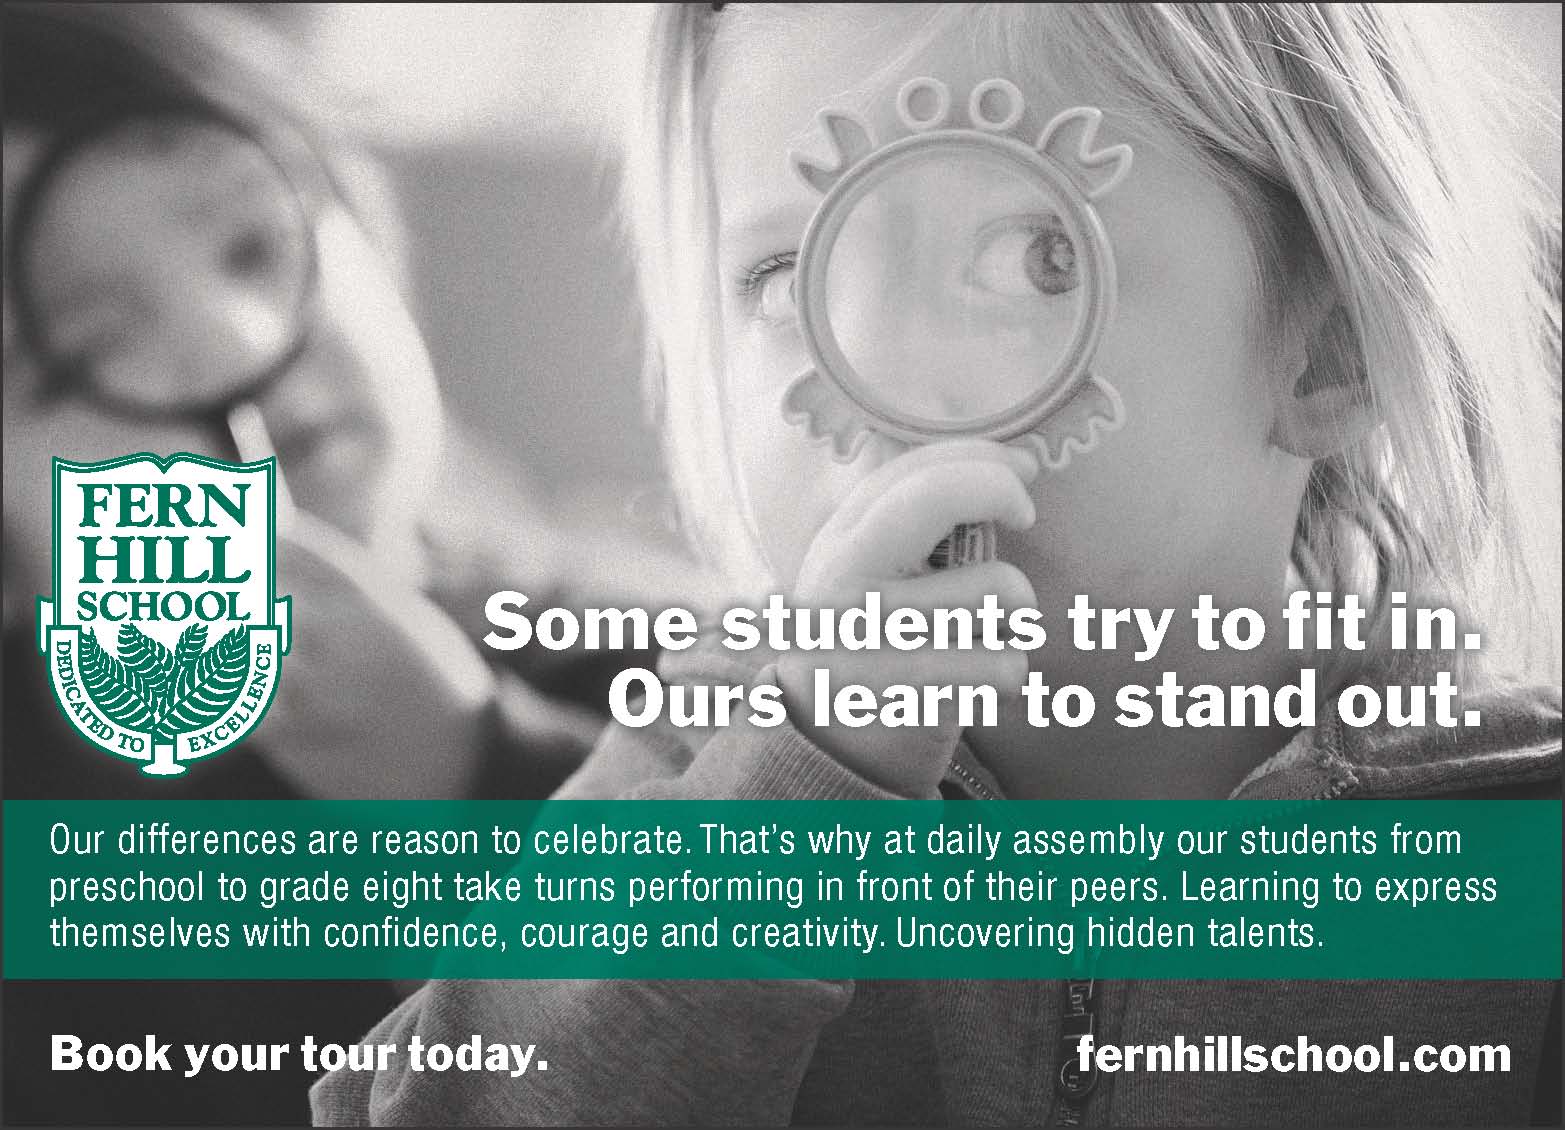 Fern Hill _Some students_ ad.jpg